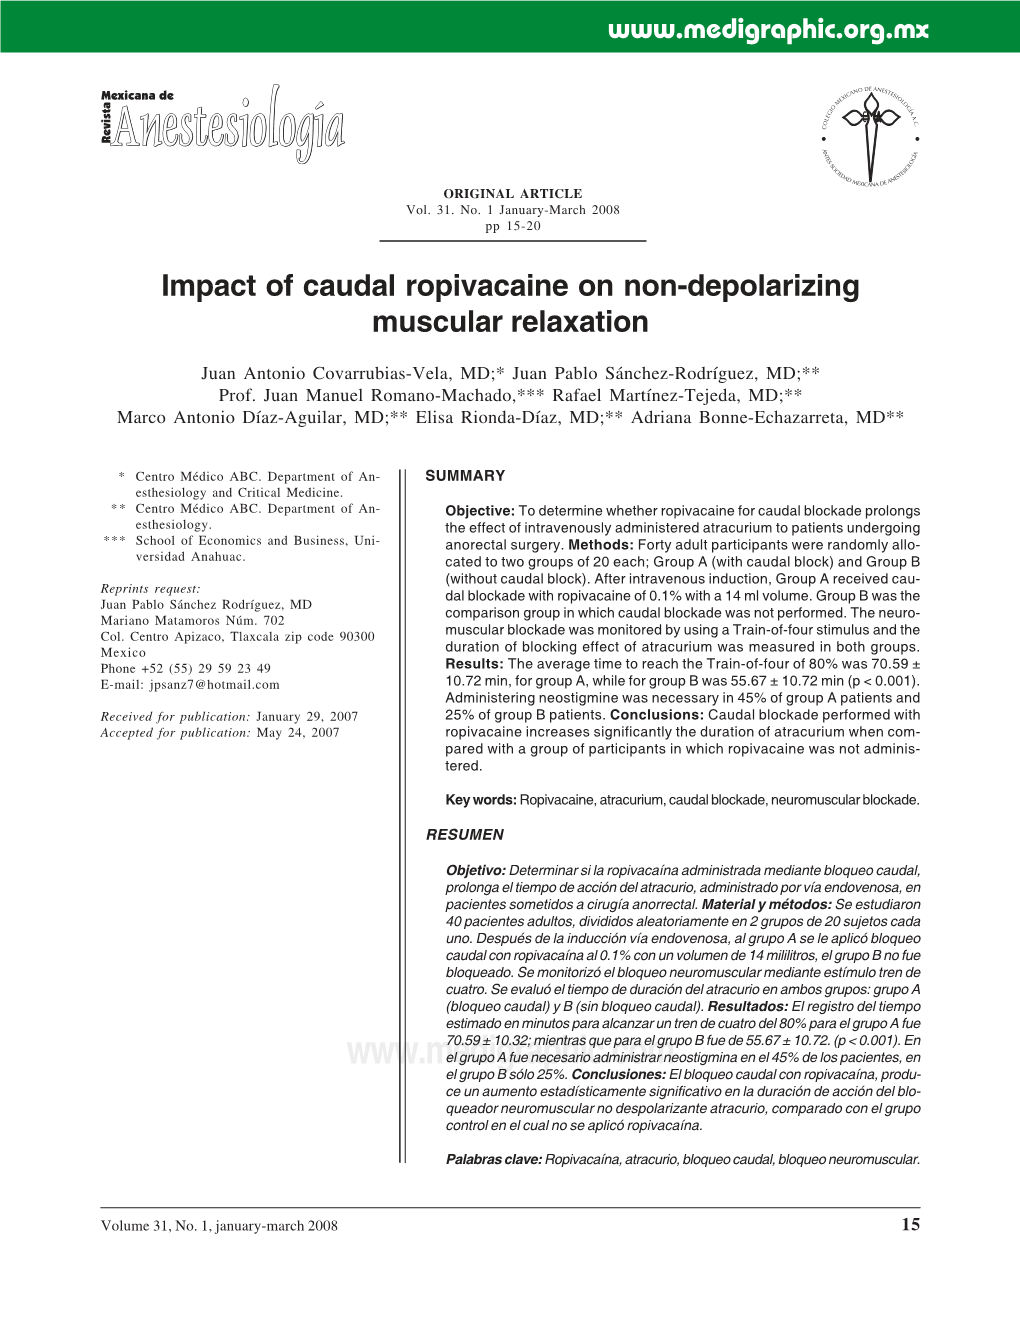 Impact of Caudal Ropivacaine on Non-Depolarizing Muscular Relaxation